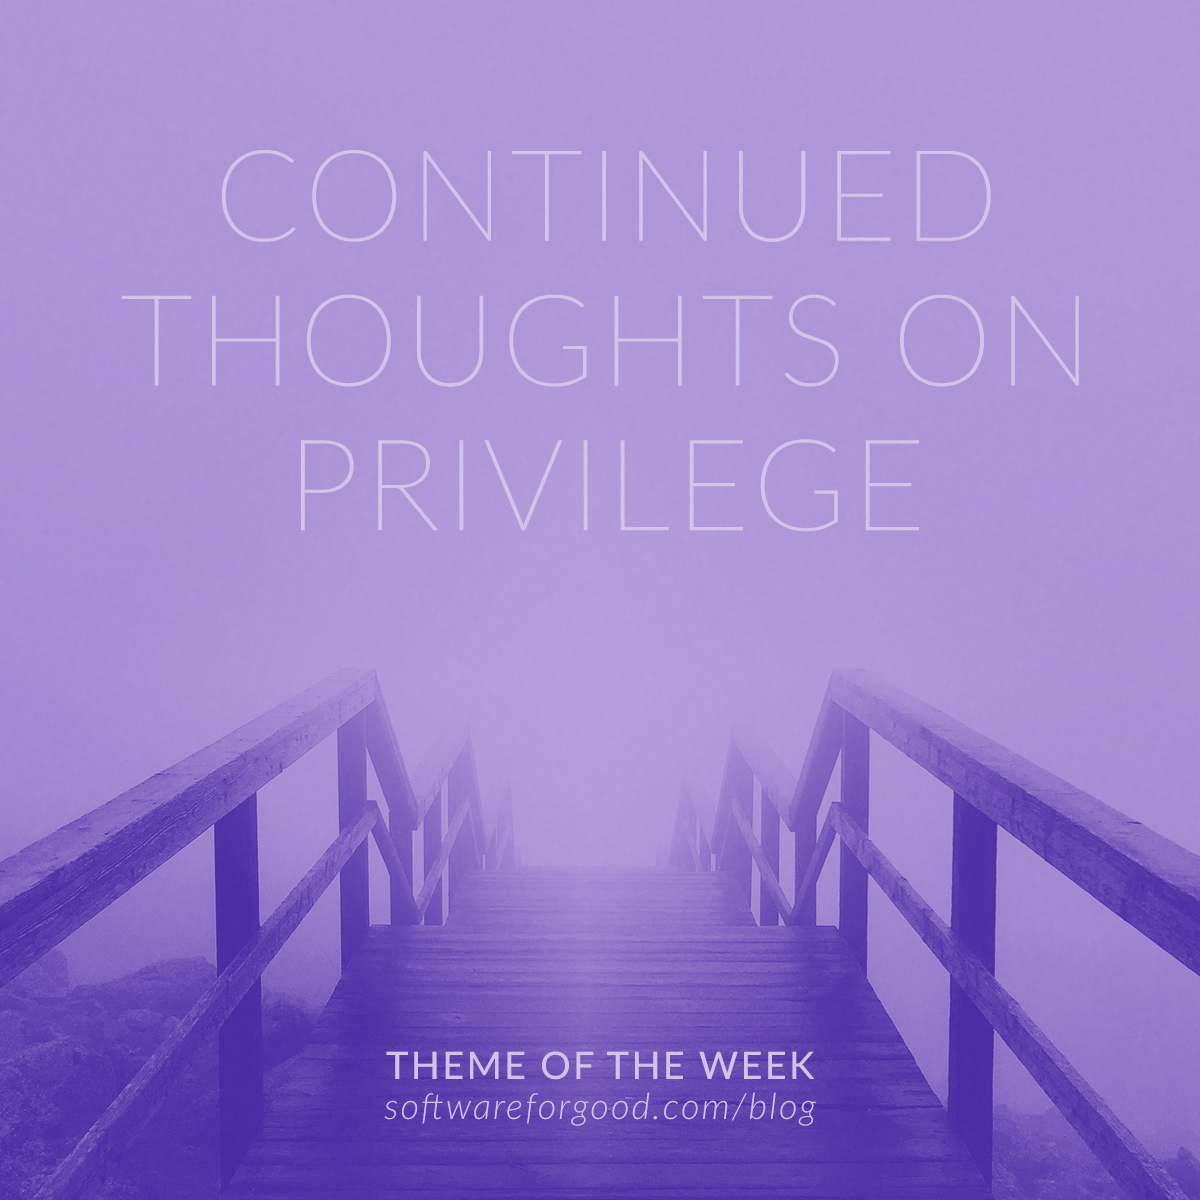 Continued Thoughts on Privilege